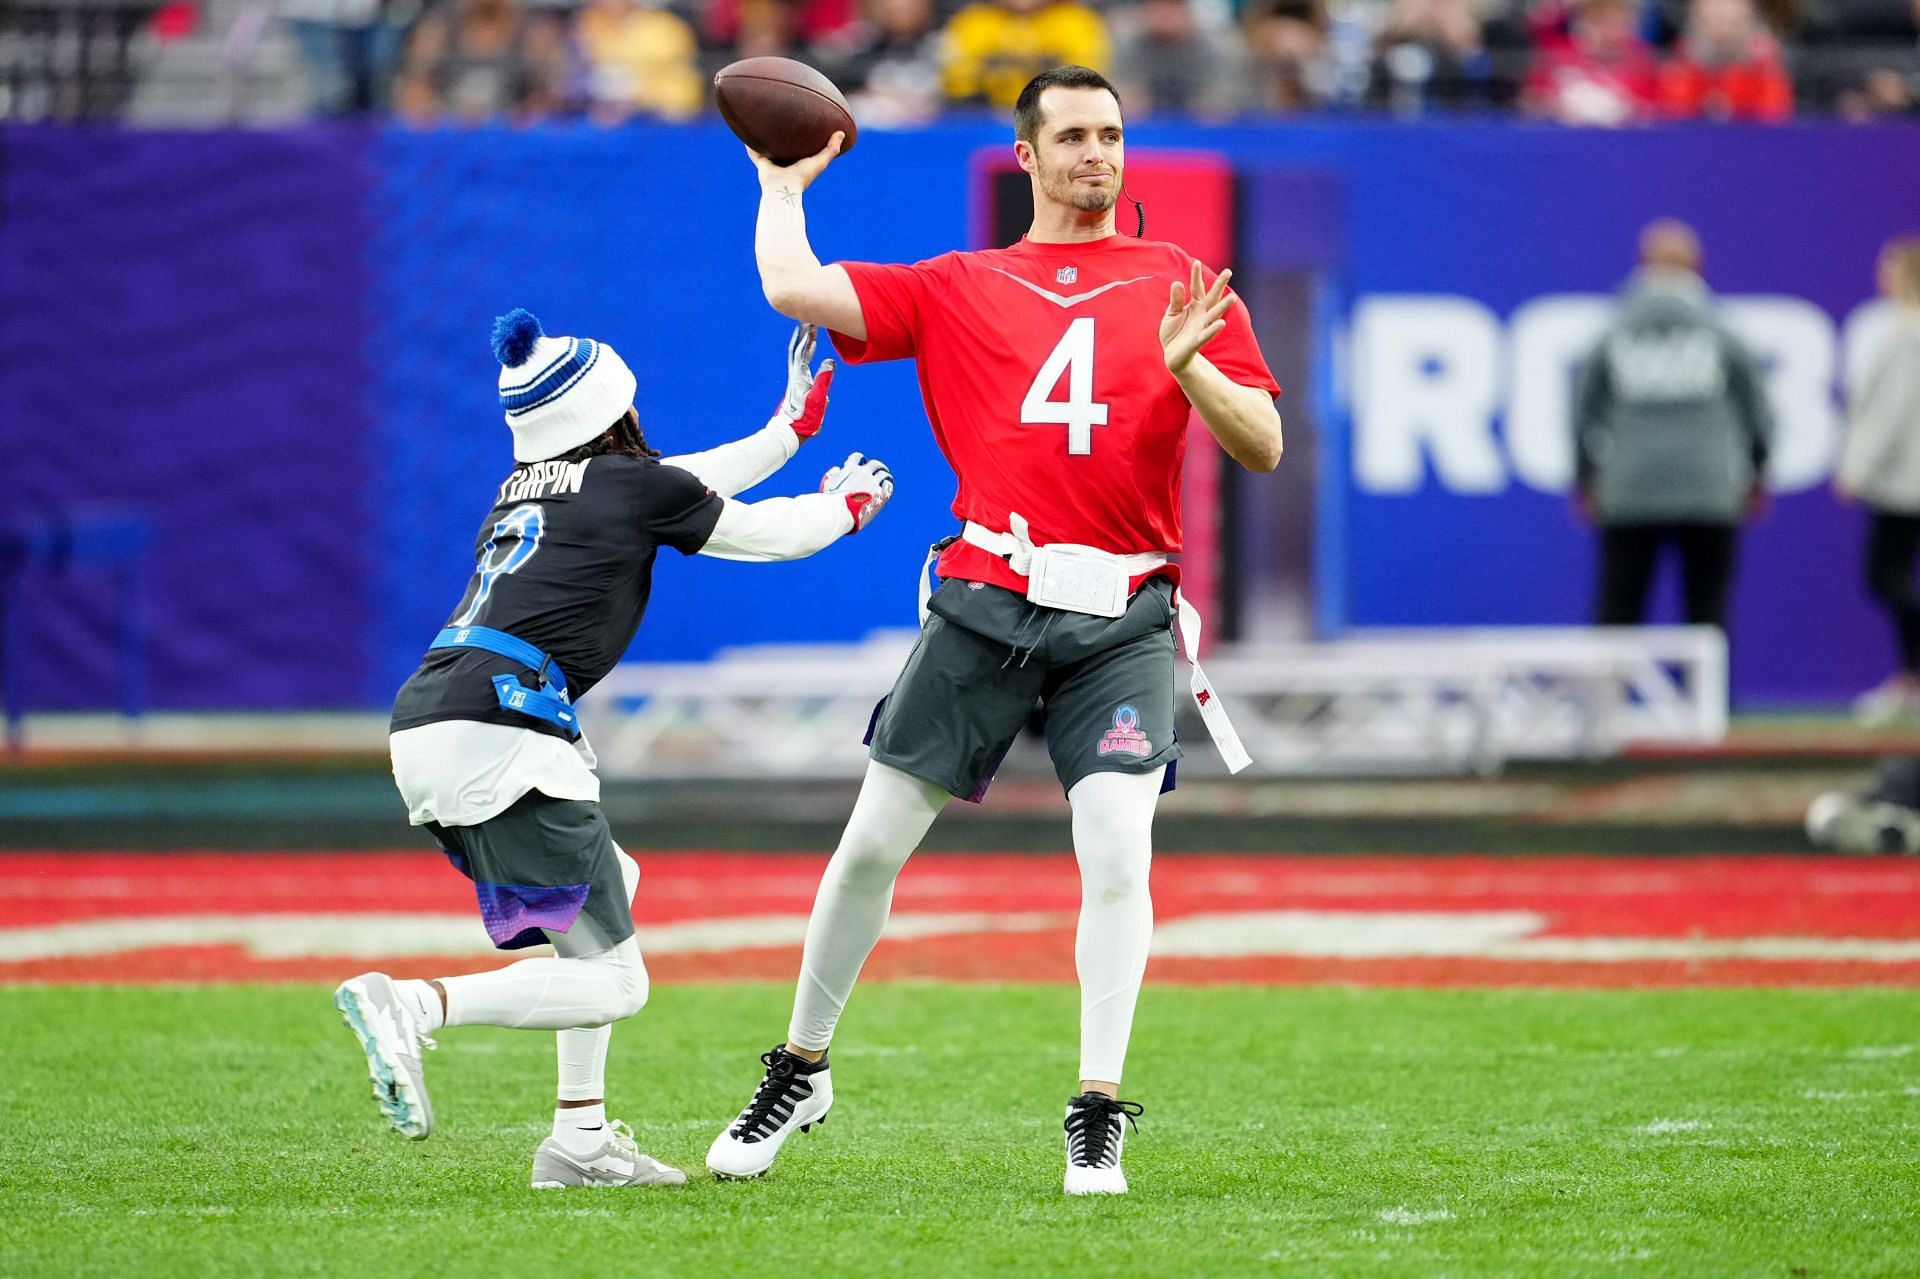 Panthers to meet with free agent Derek Carr at this week's combine